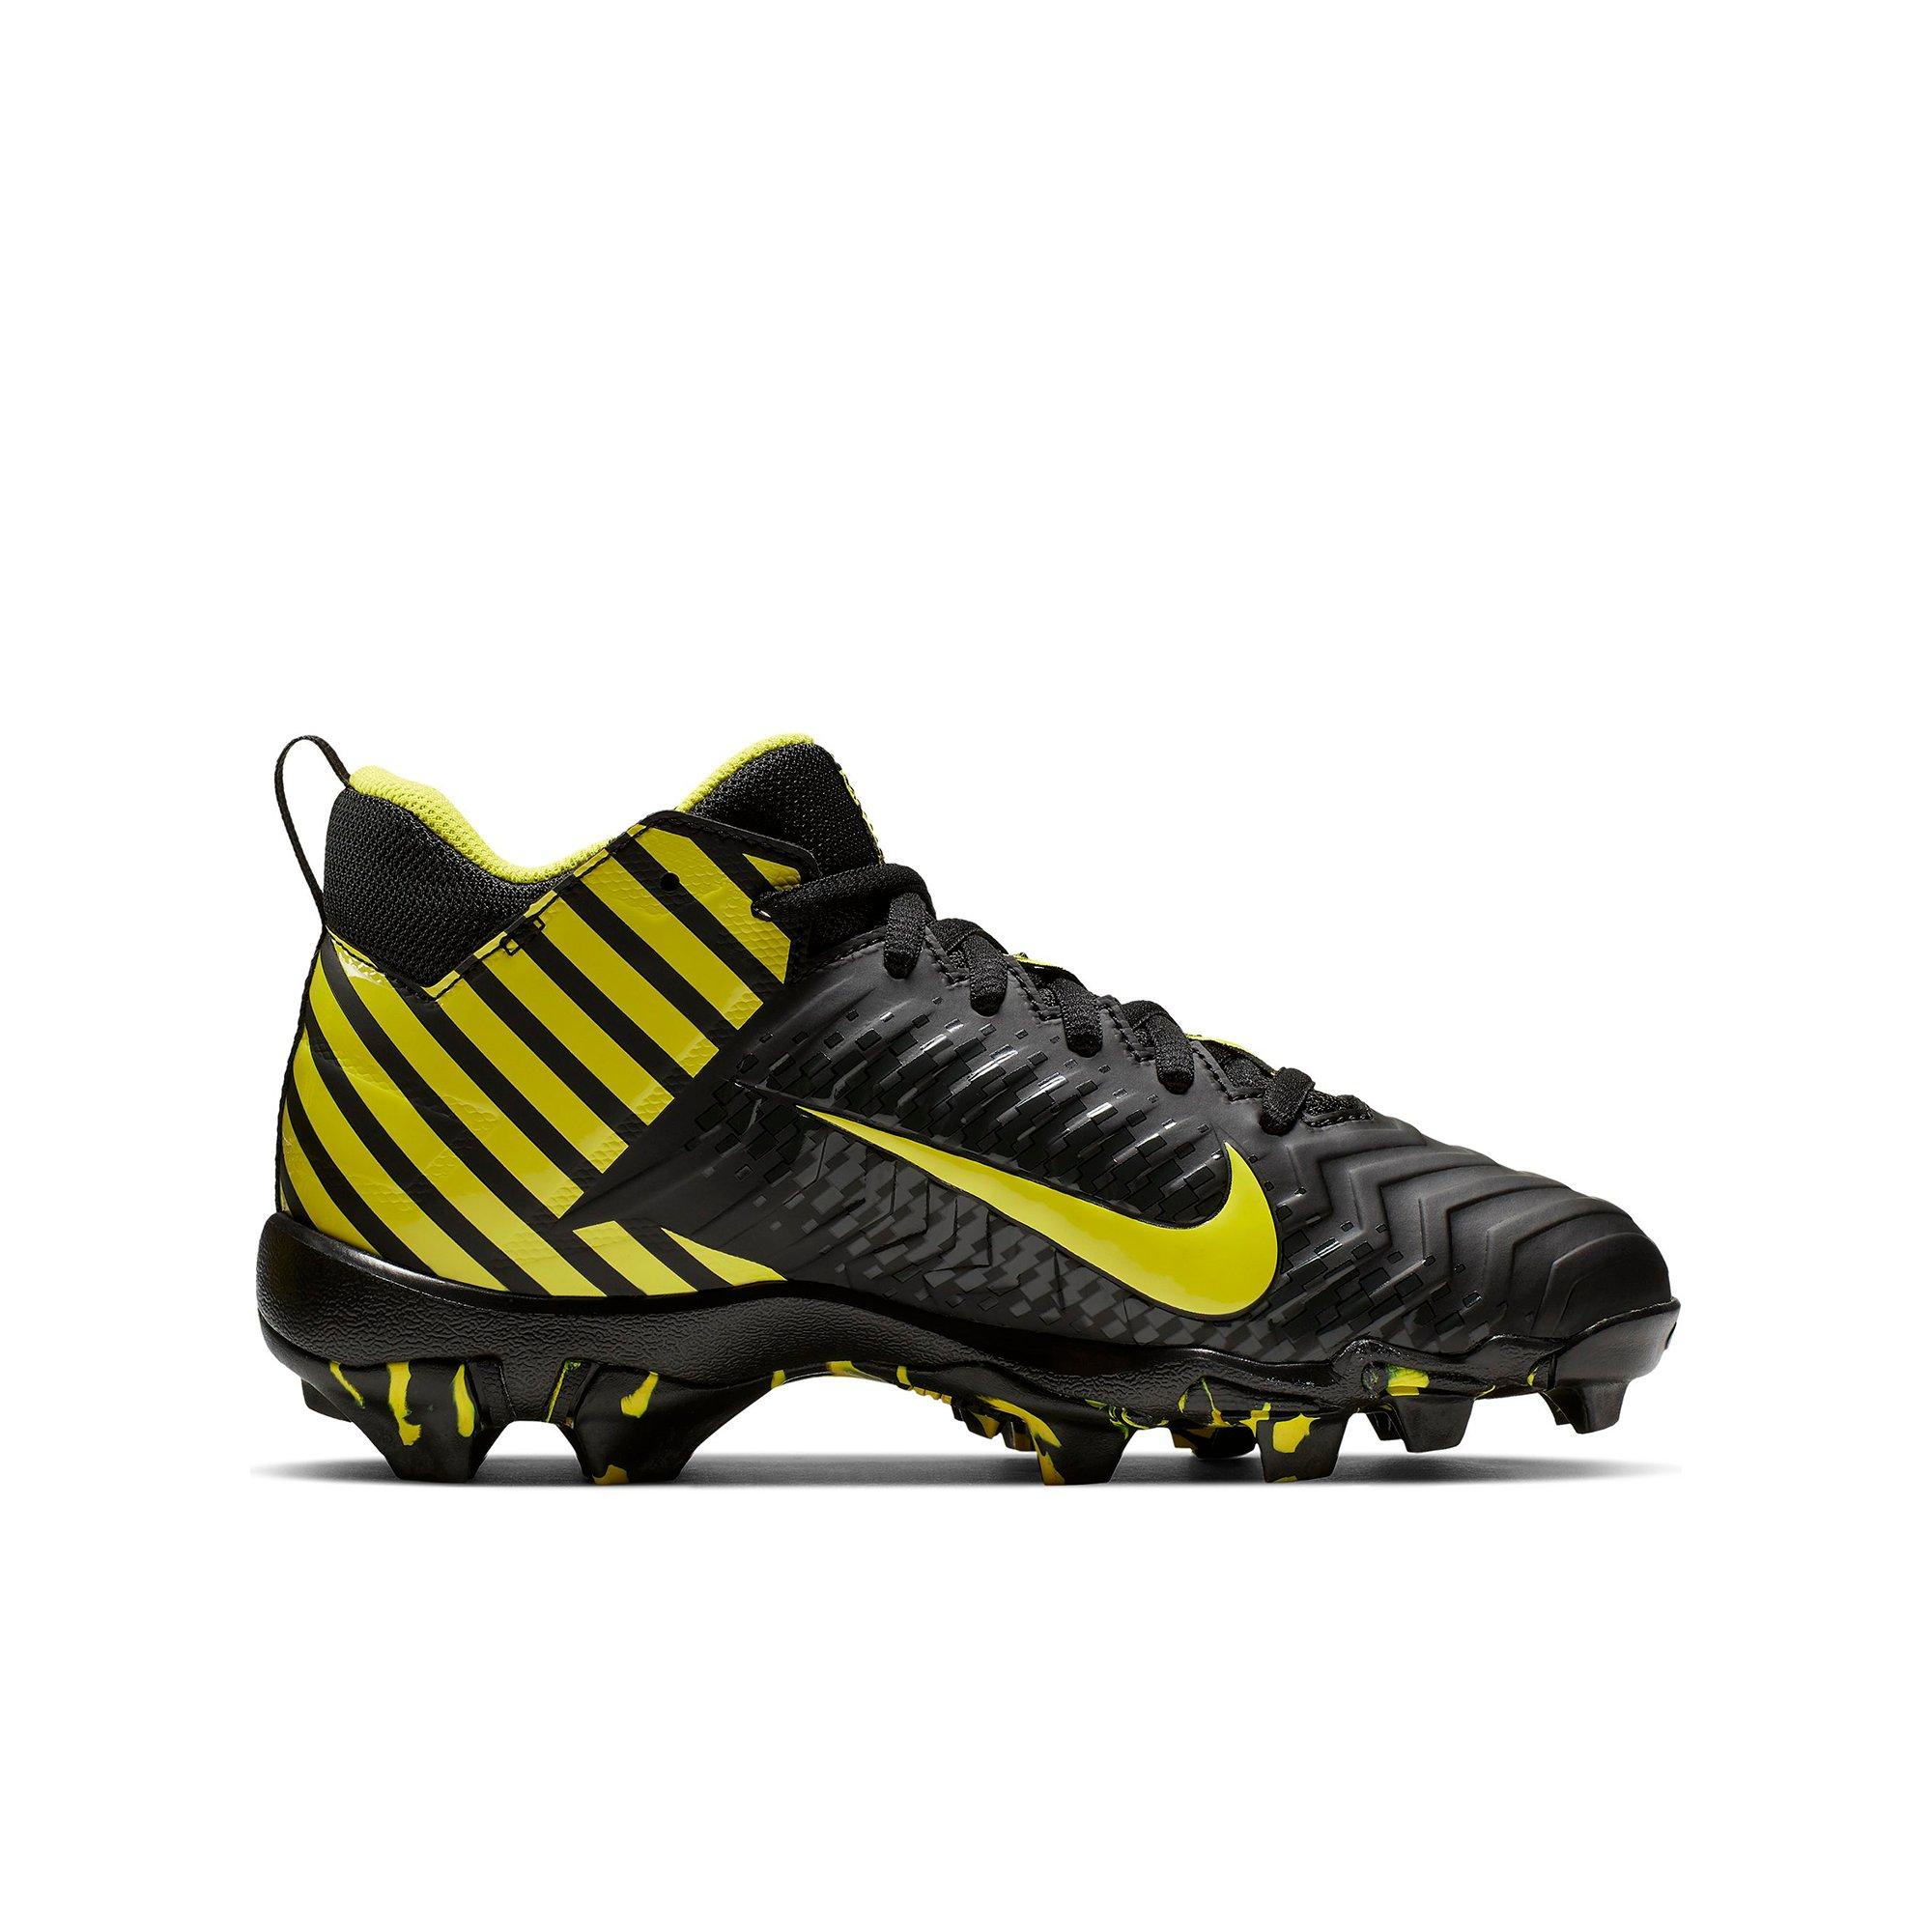 size 13 youth football cleats